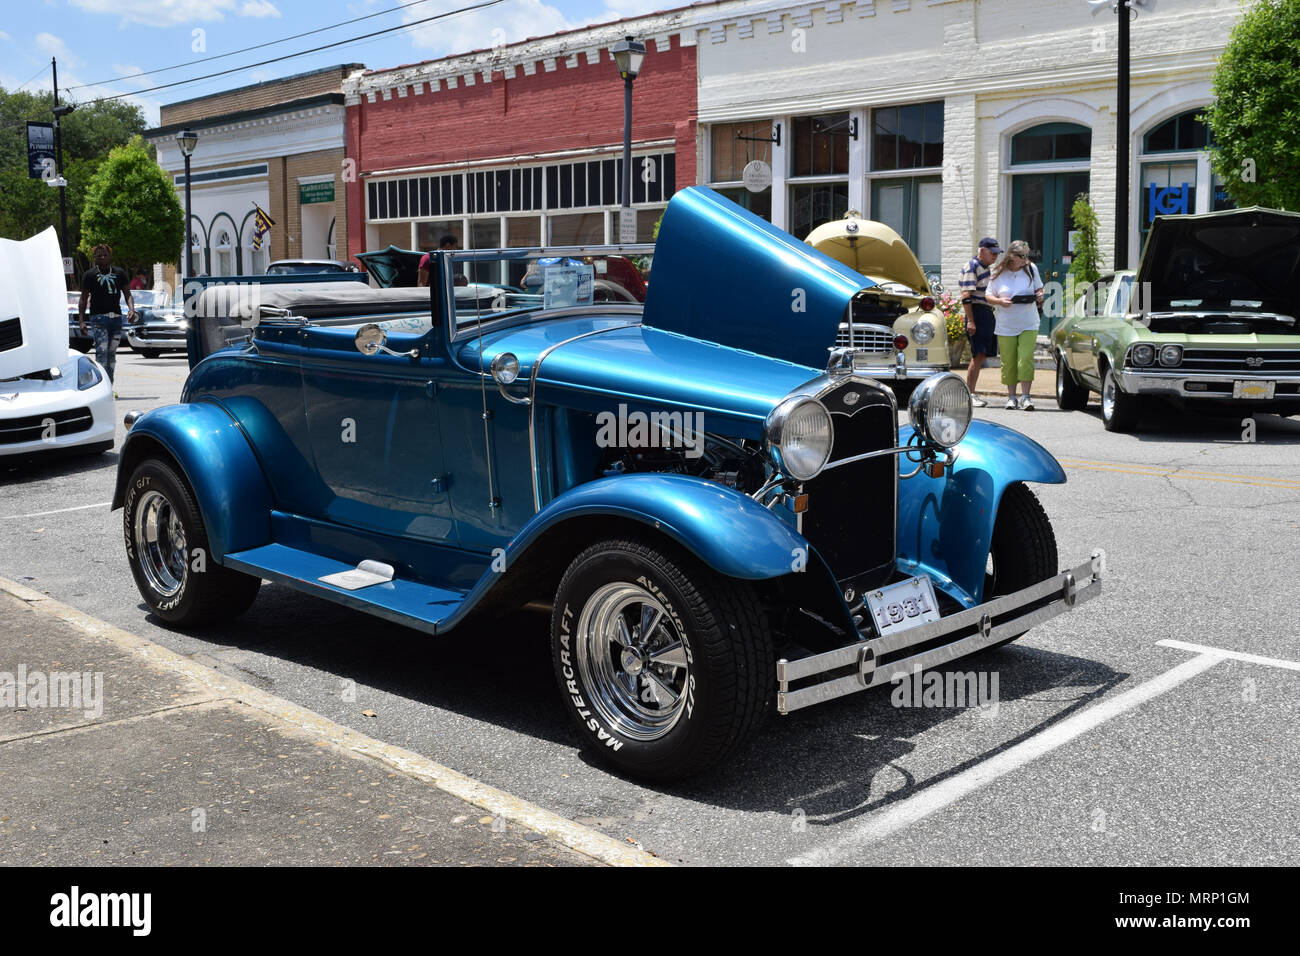 https://c8.alamy.com/comp/MRP1GM/a-1931-ford-with-a-rumble-seat-at-a-car-show-MRP1GM.jpg